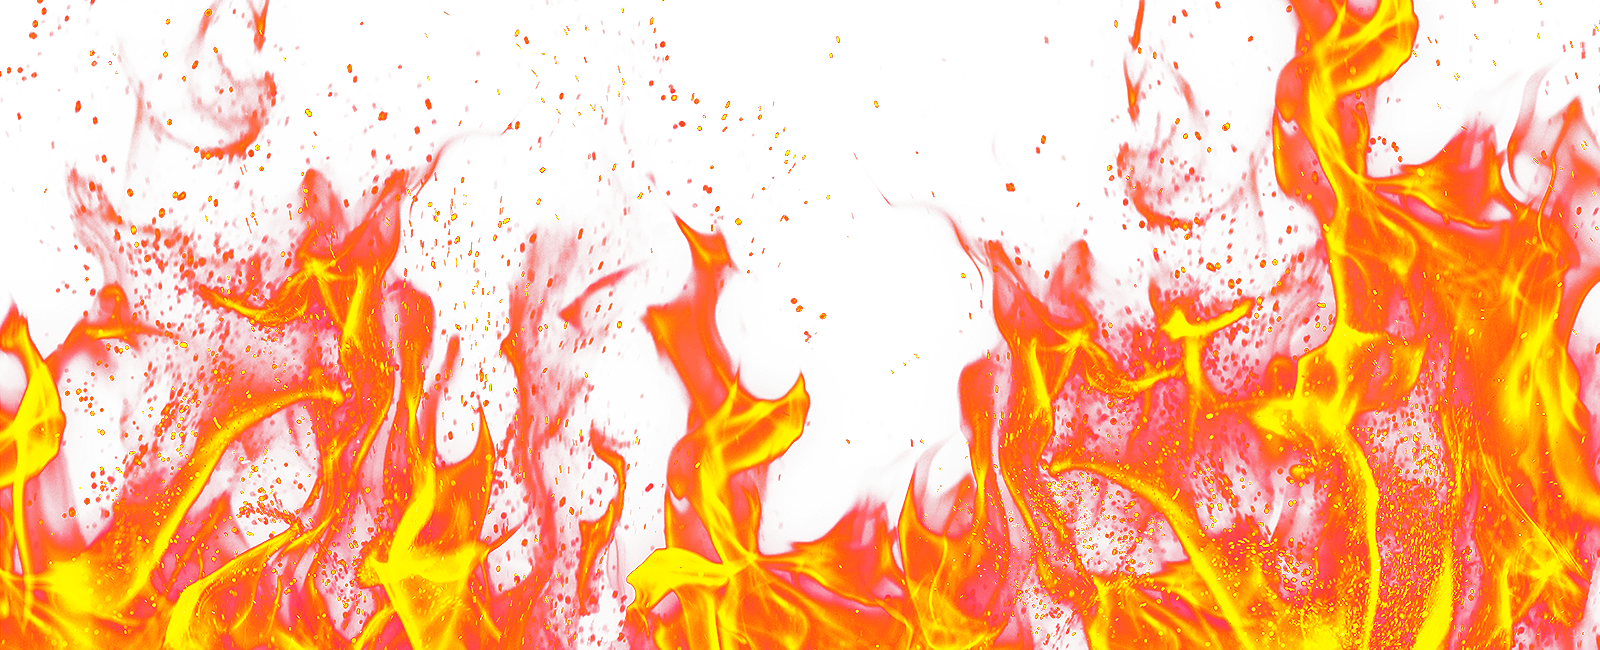 fire flame images download #8153